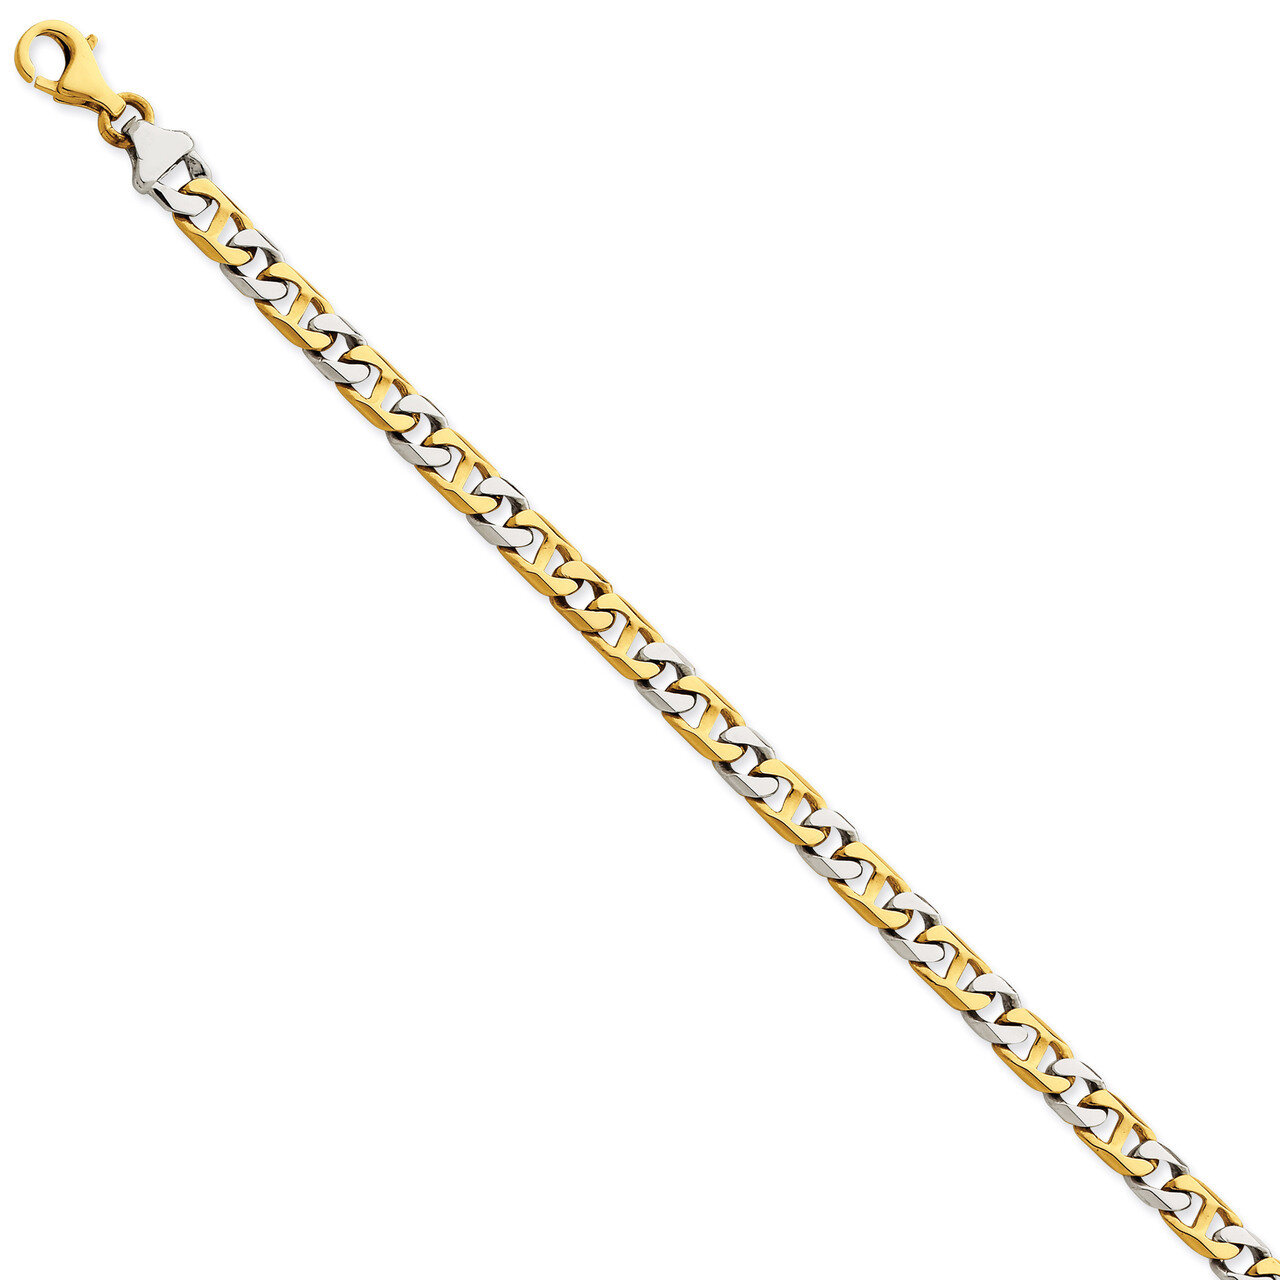 6mm Hand-Polished Fancy Link Chain 18 Inch 14k Two-Tone Gold LK259-18